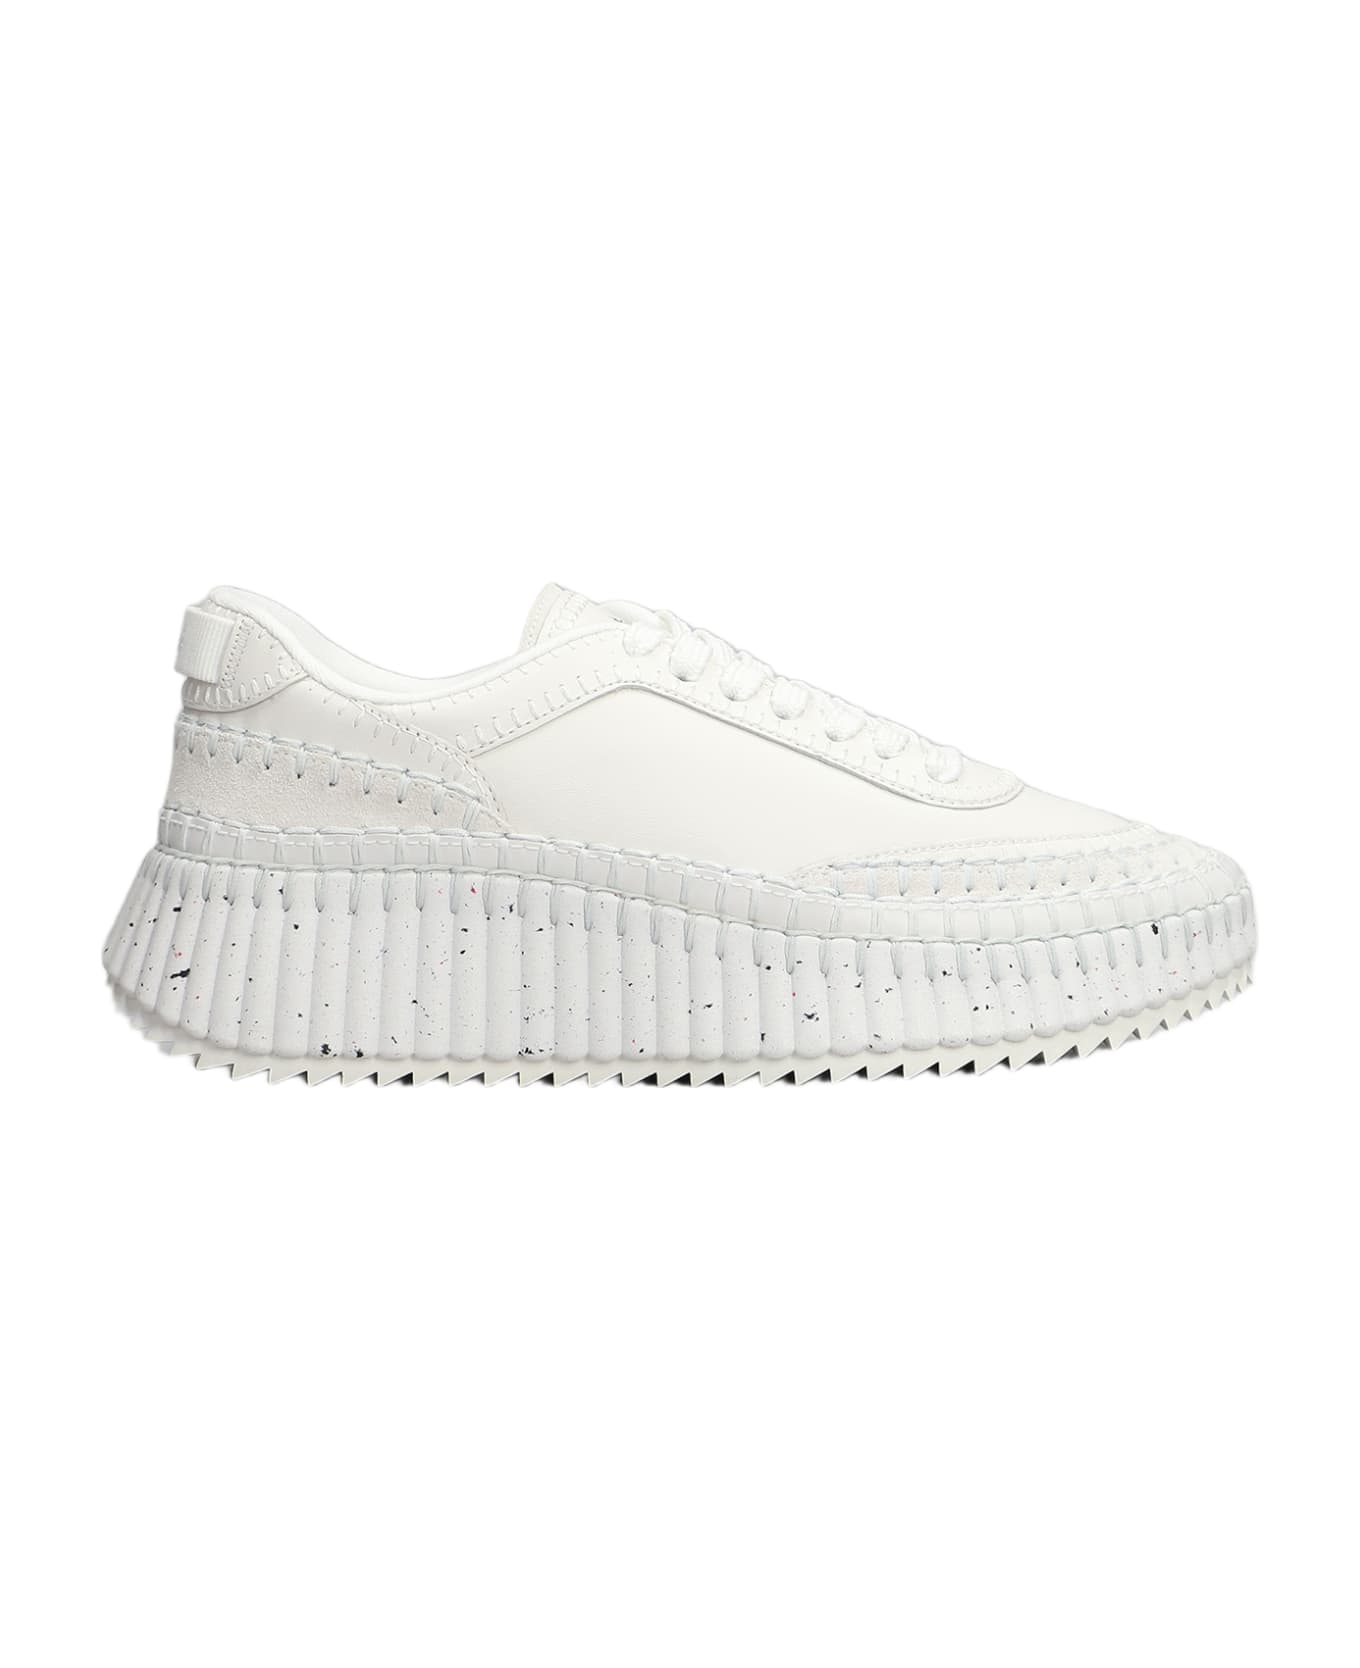 Chloé Nama Sneakers In White Leather - white